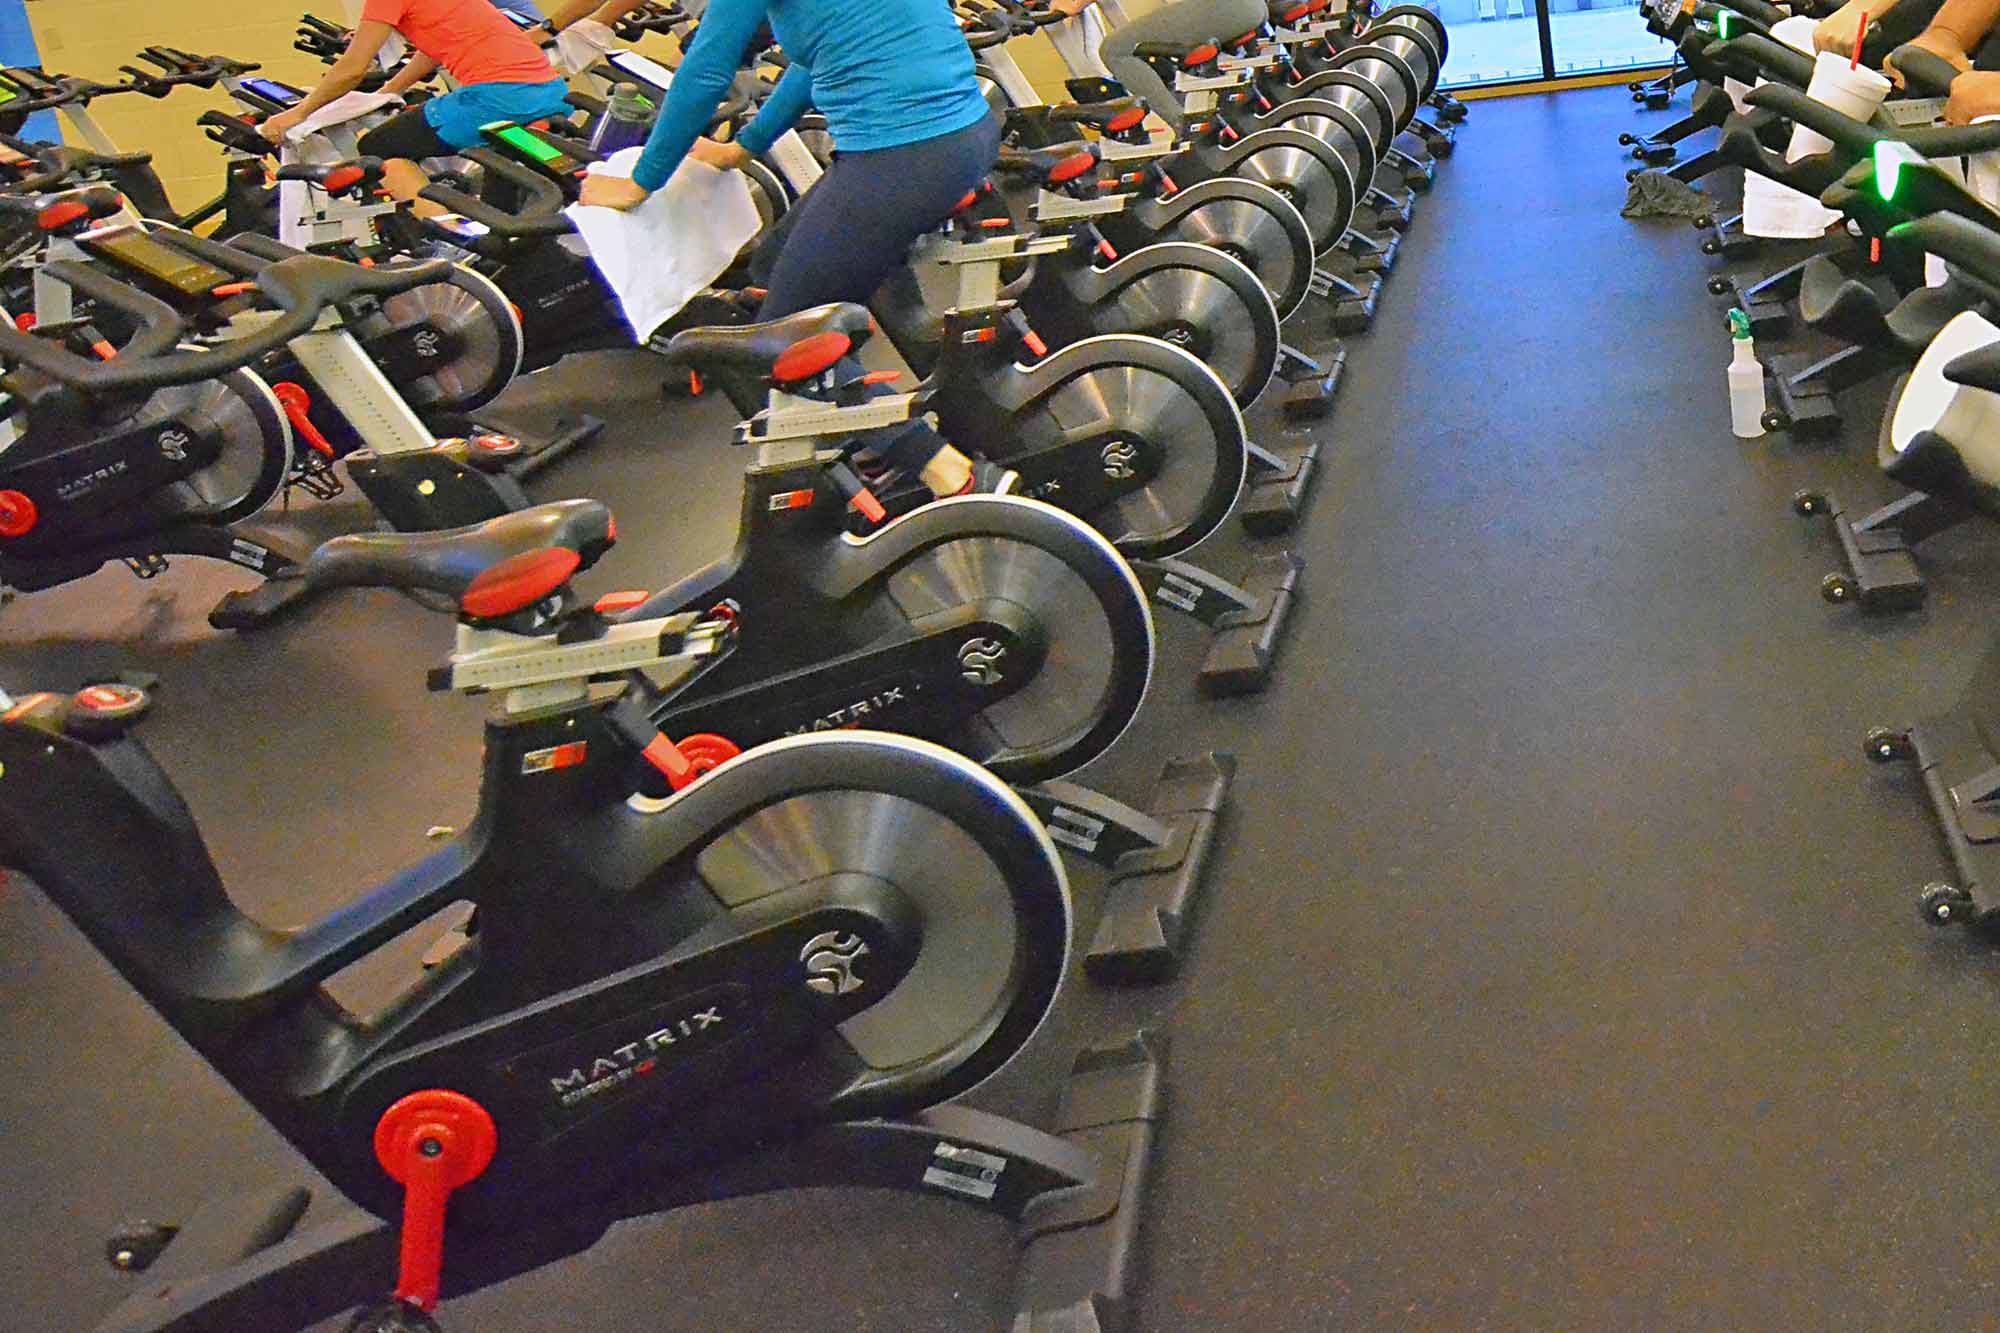 Matrix bikes in cycling class at Red's in Lafayette, LA.